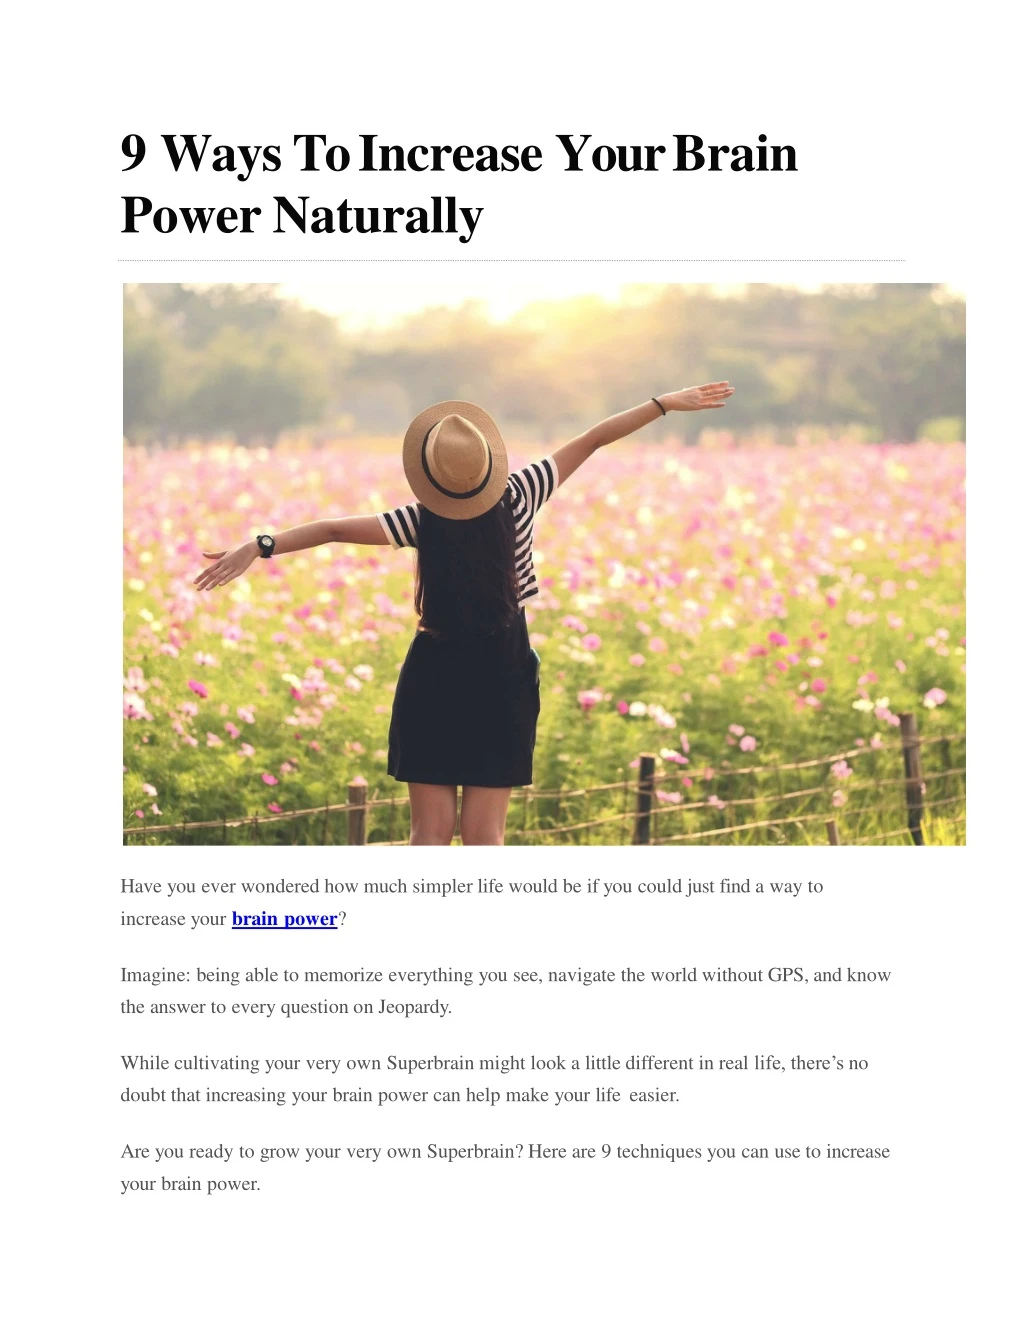 9 ways to increase your brain power naturally